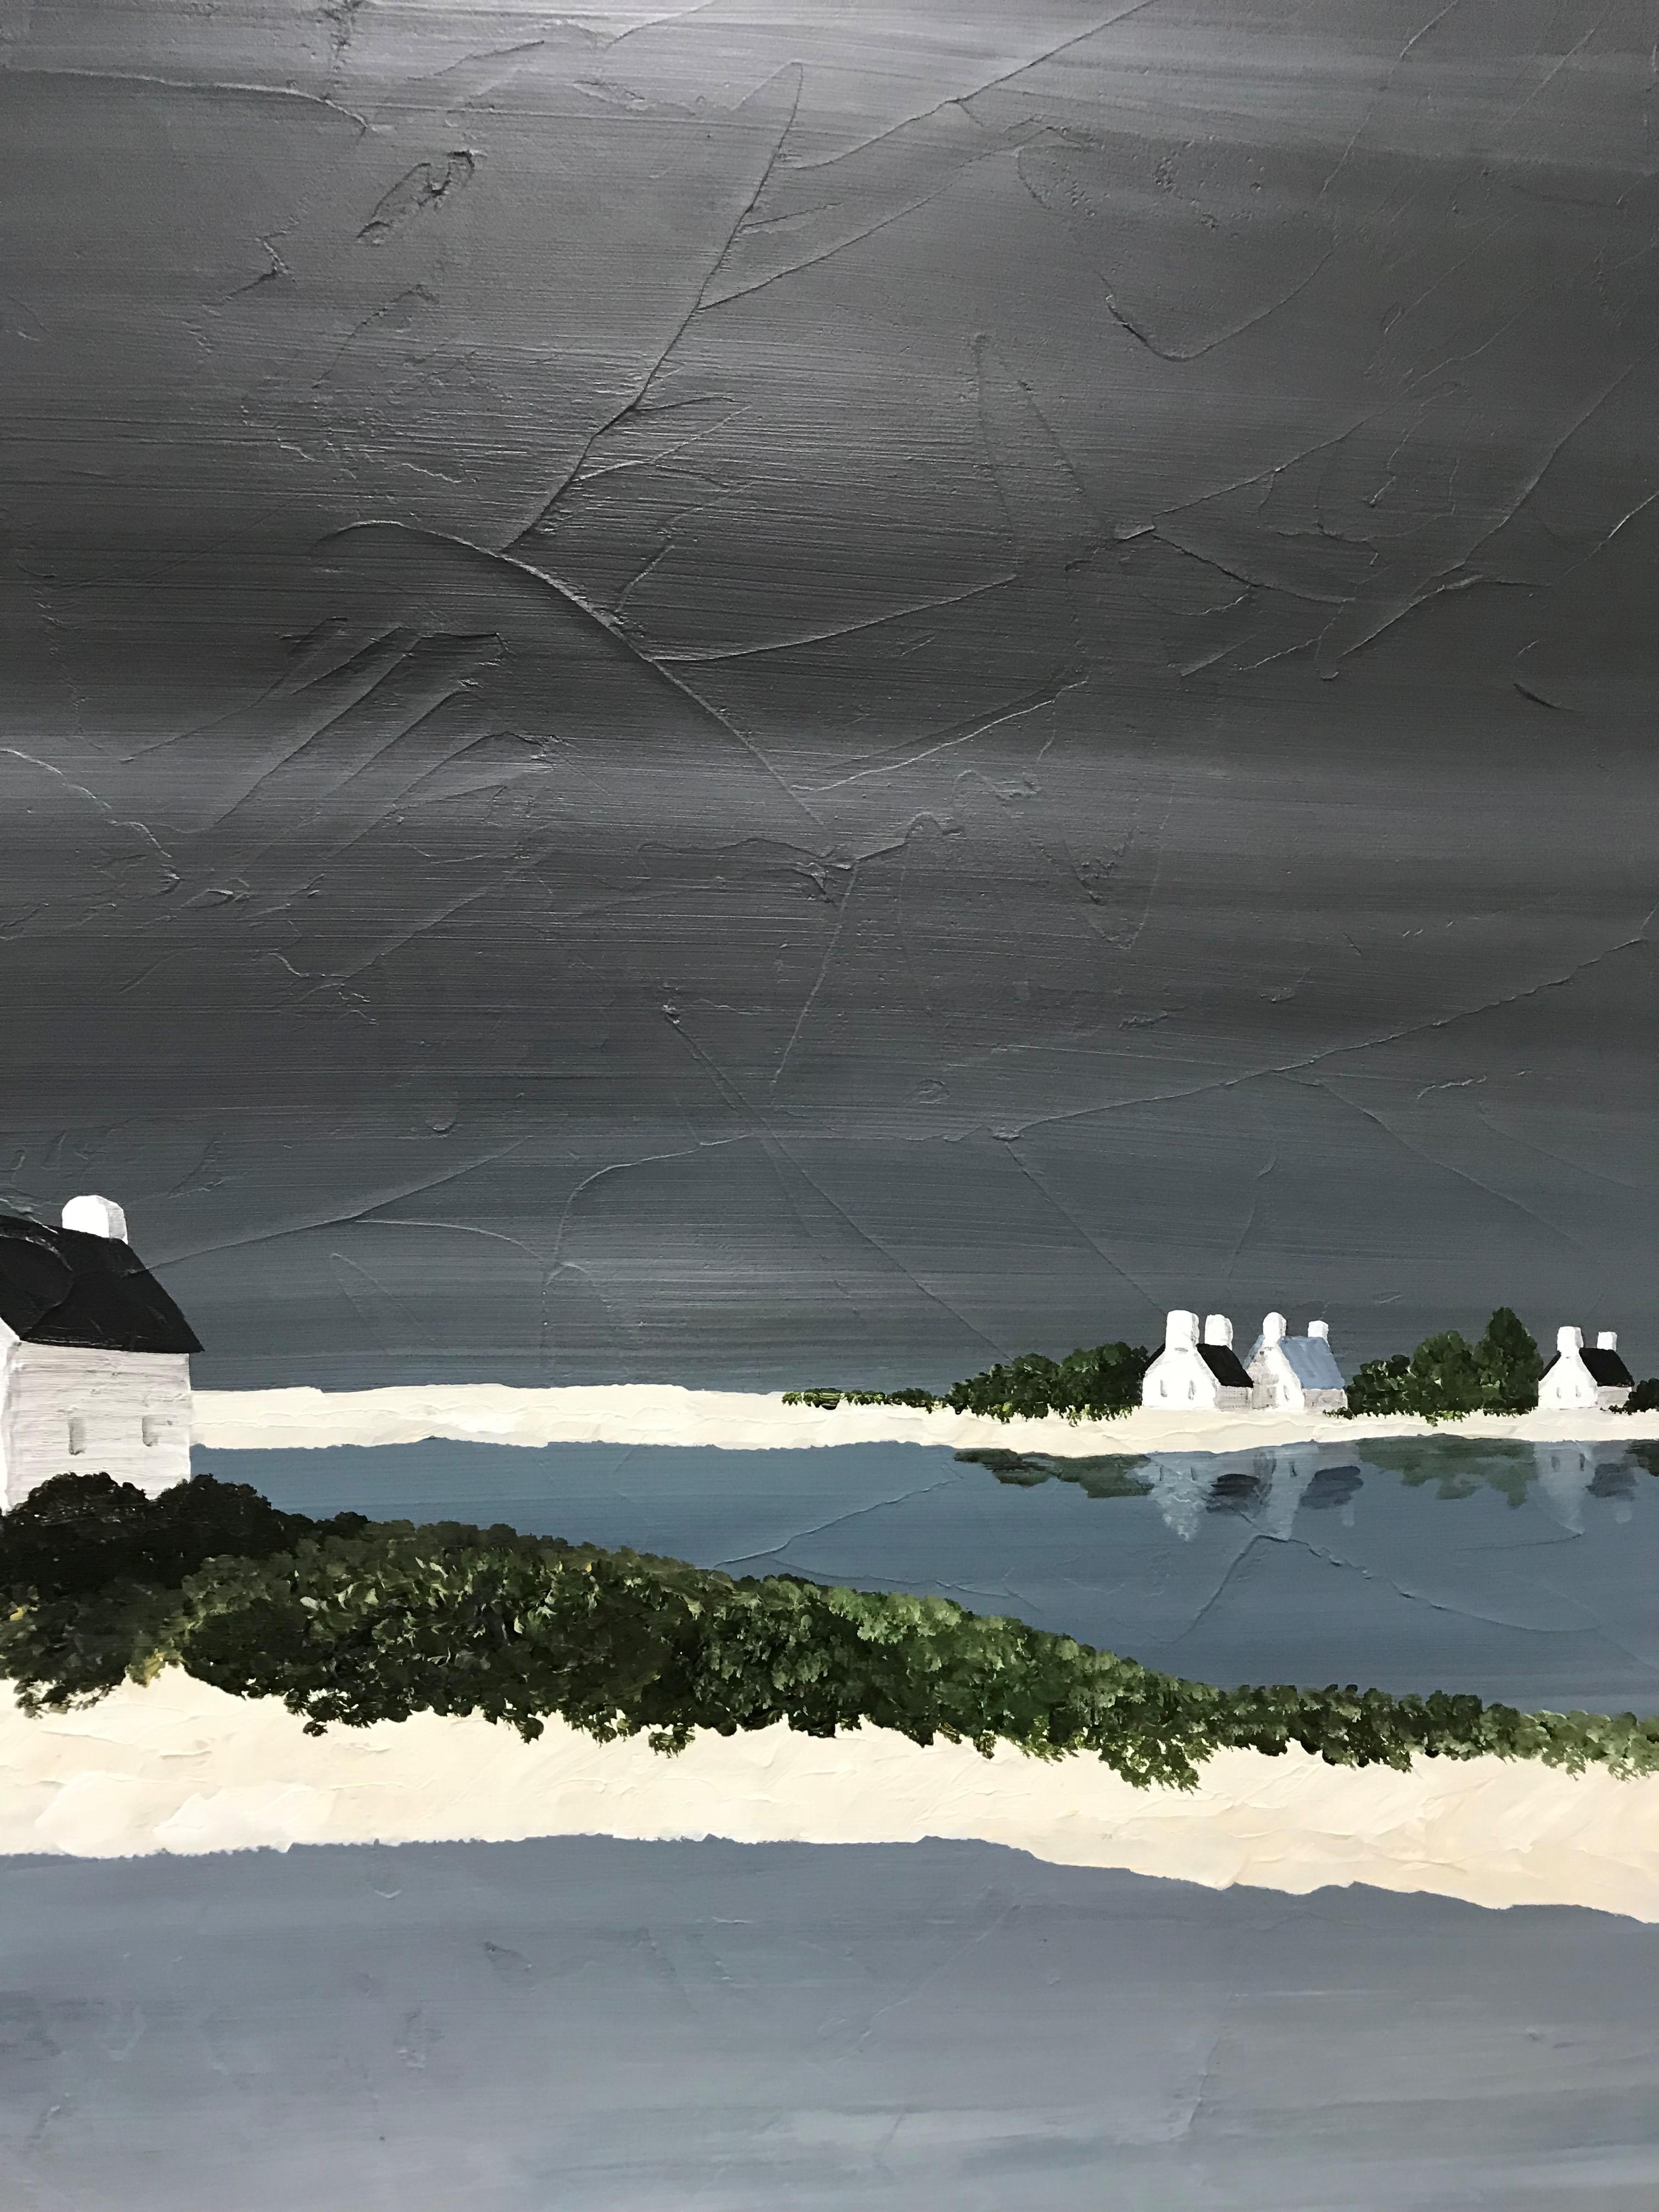 'Peaceful Shores' is a medium size vertical acrylic on canvas seascape painting created by American artist Susan Kinsella in 2018. Featuring a perfectly contrasting palette made of grey, light blue, beige and dark green tones, the painting exudes an